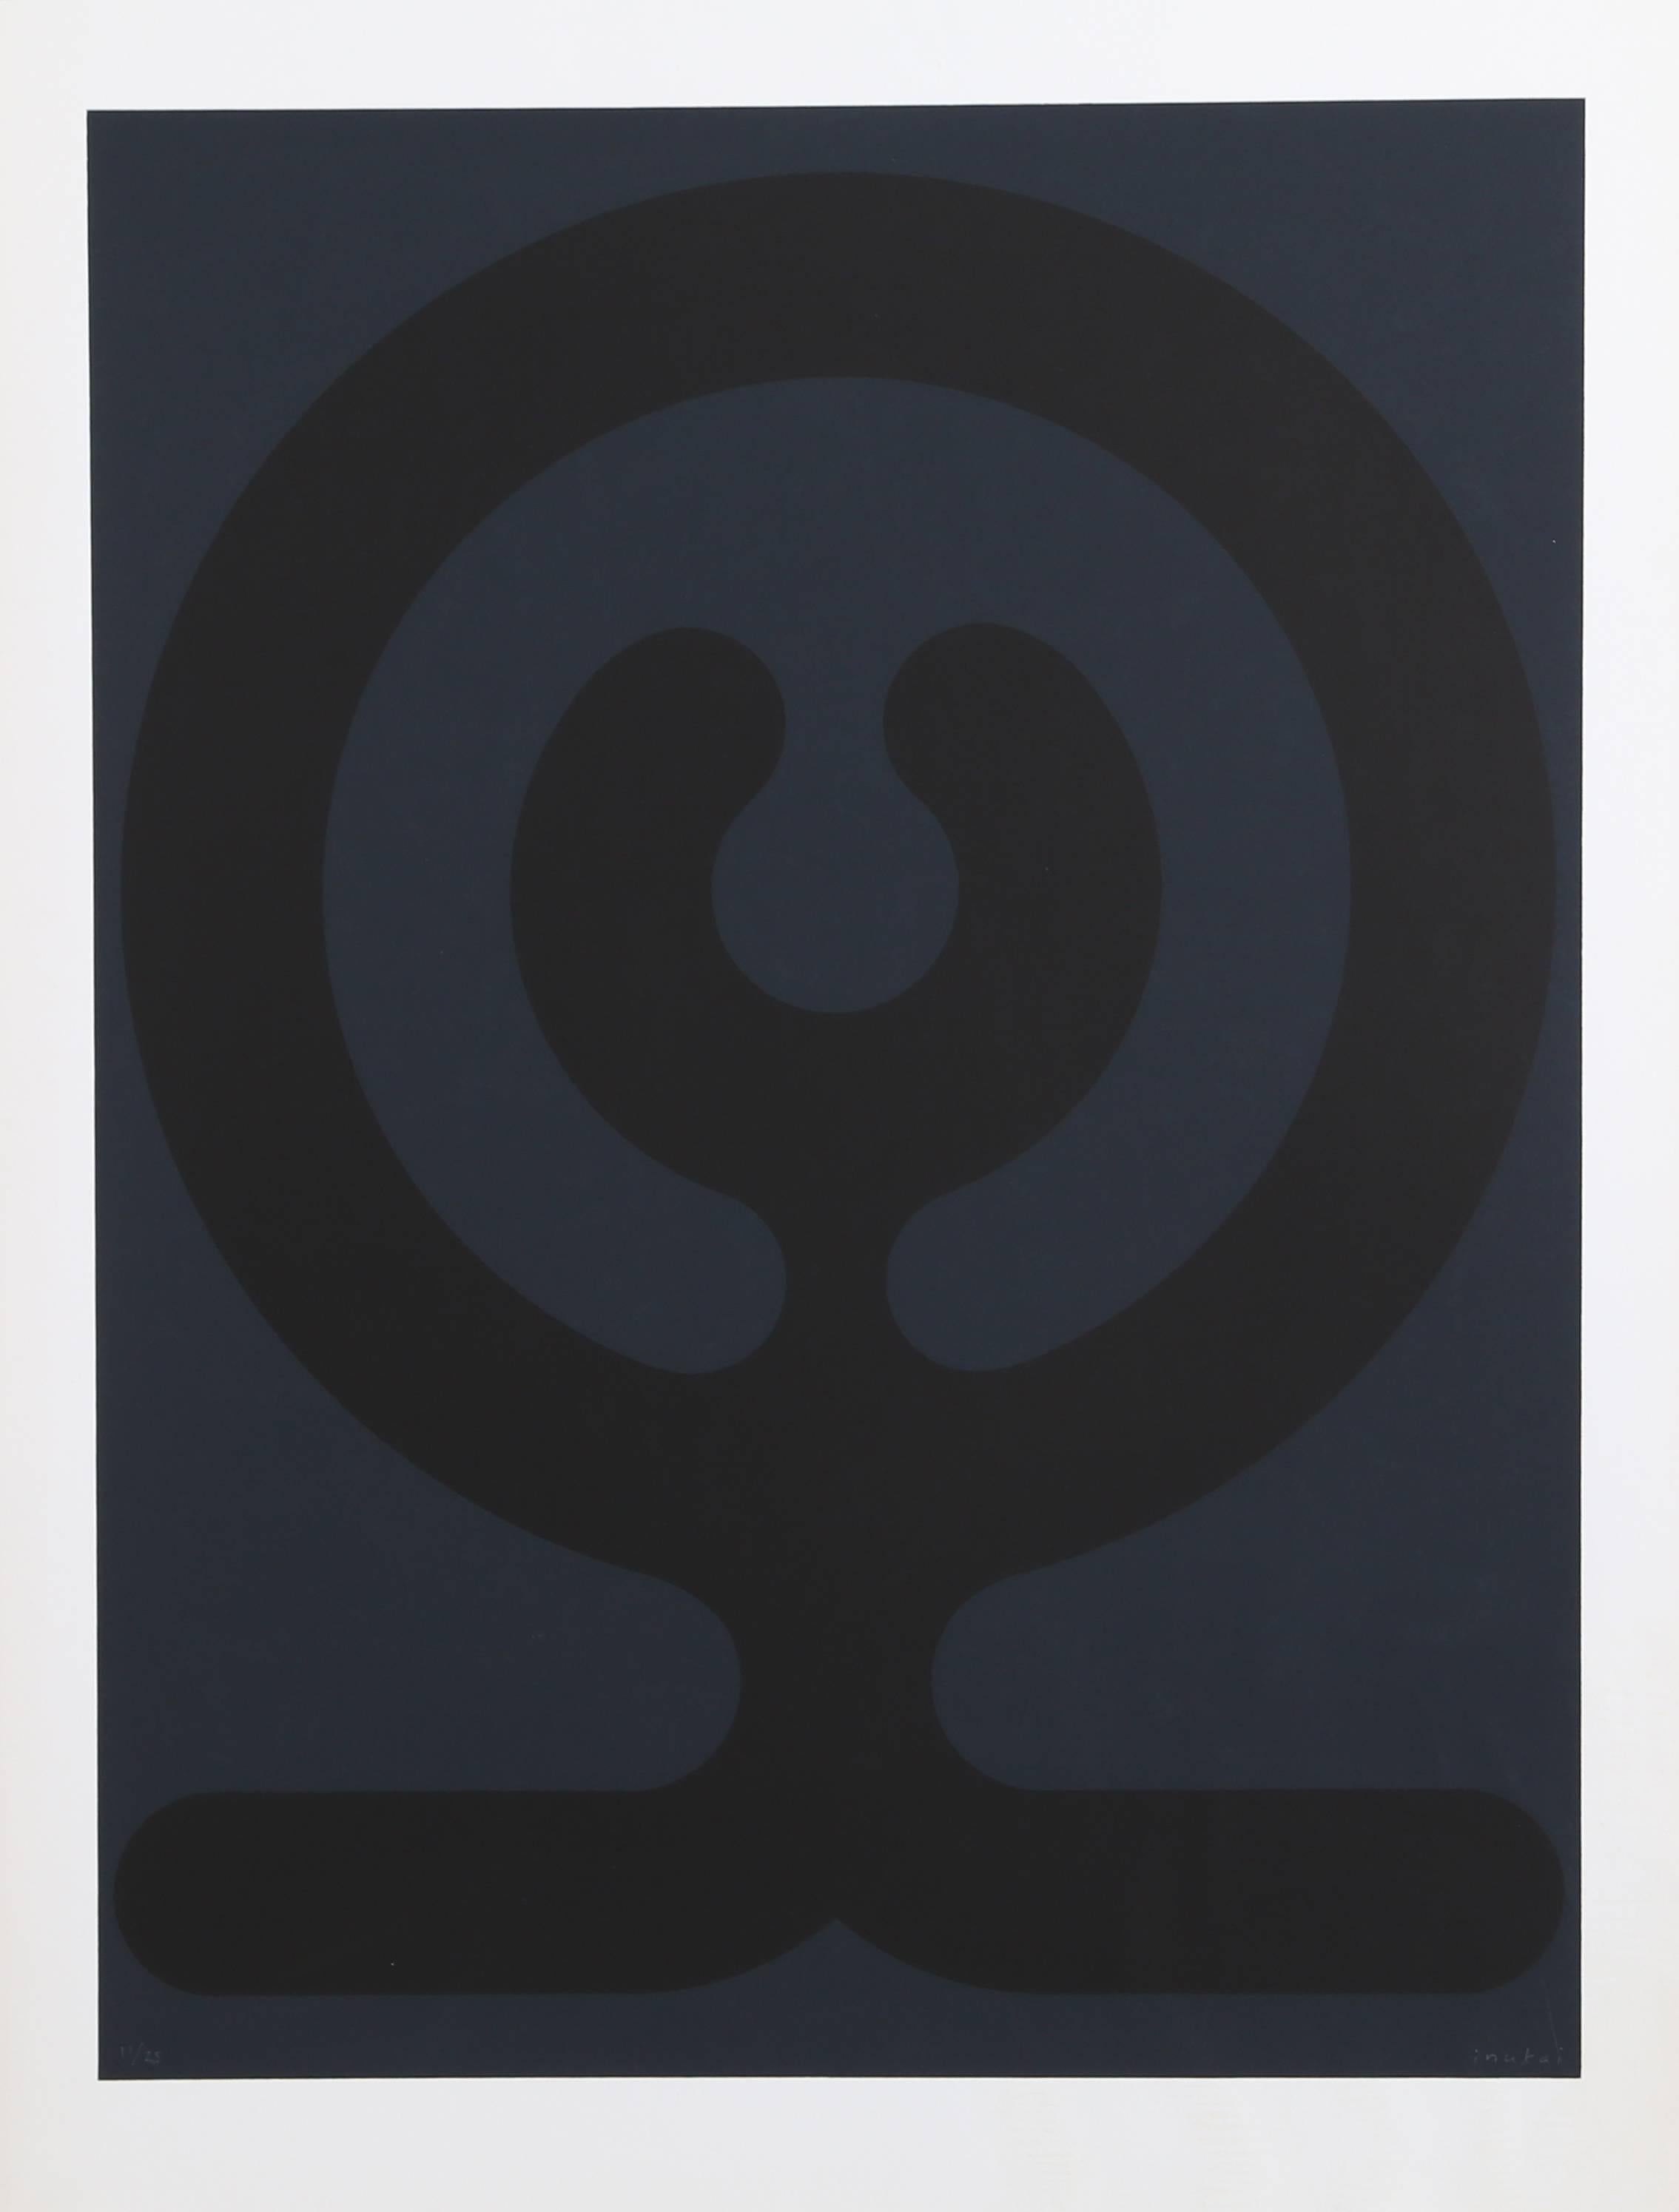 Artist: Kyohei Inukai, American (1913 - 1985)
Title: Egg (Black)
Year: circa 1970
Medium: Silkscreen, signed and numbered in pencil
Edition: 25
Image Size: 26.5 x 20 inches
Size: 35 x 23 in. (88.9 x 58.42 cm)